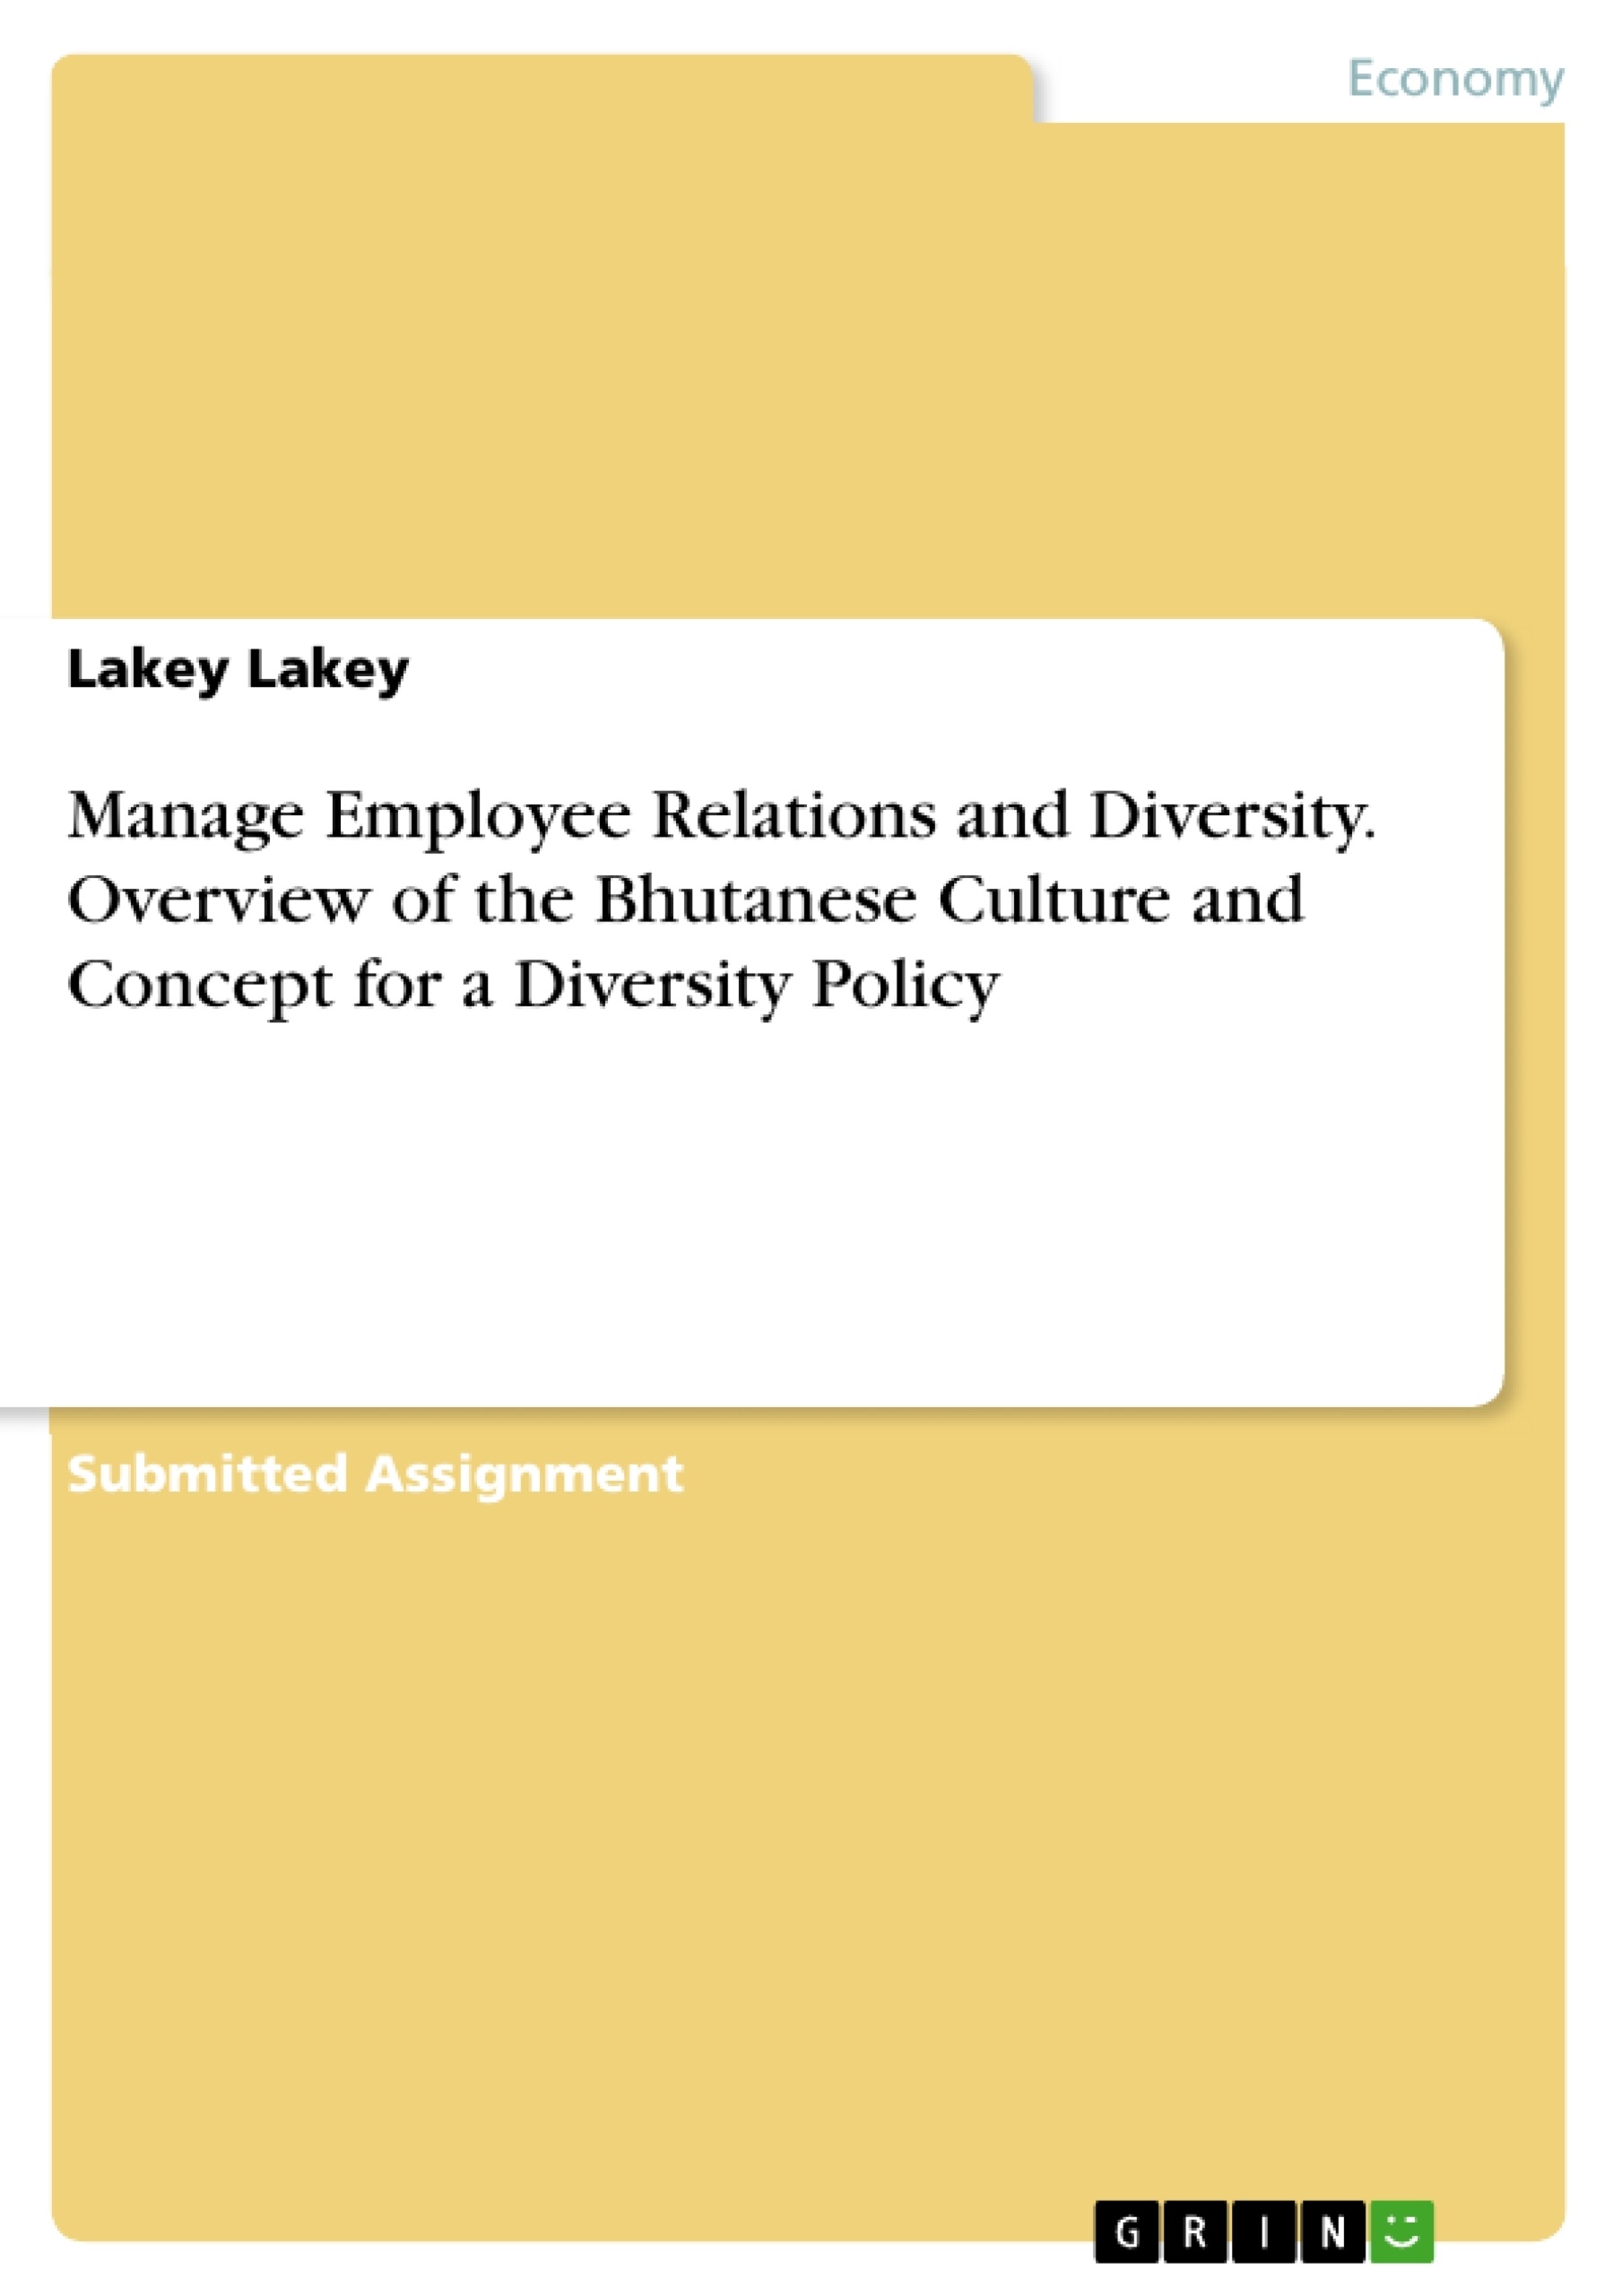 Title: Manage Employee Relations and Diversity. Overview of the Bhutanese Culture and Concept for a Diversity Policy